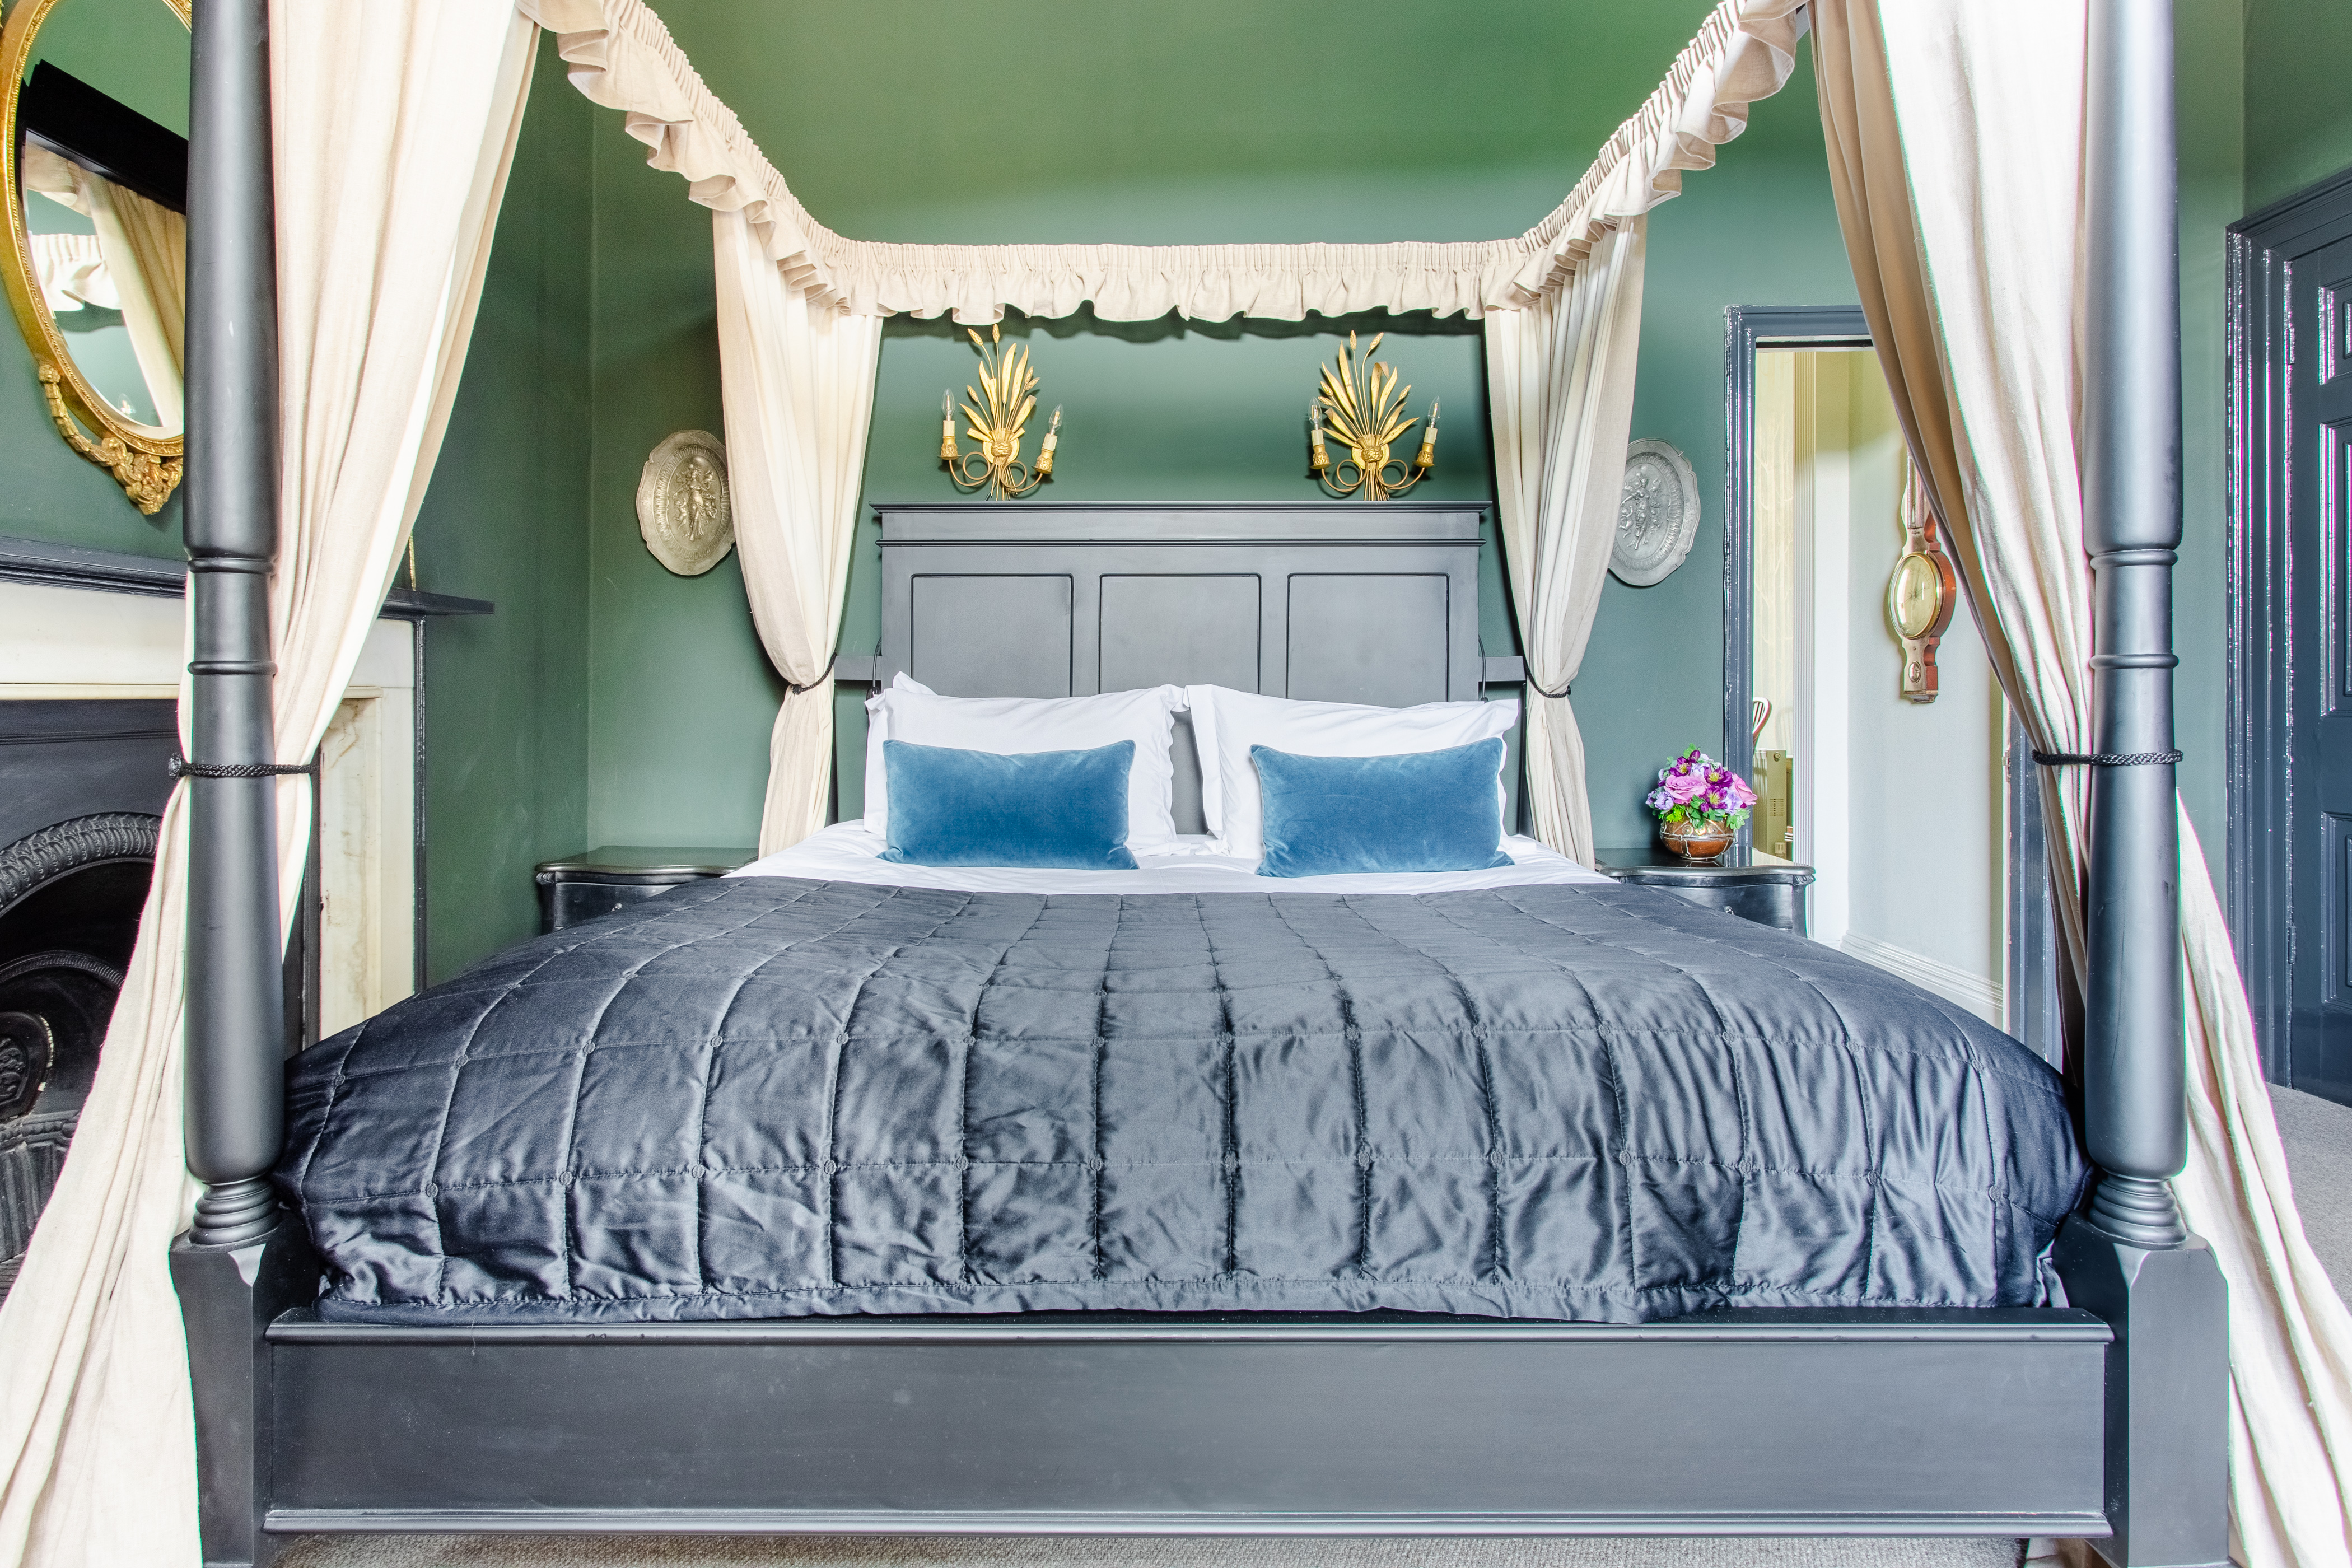  Bed  Inspo from Airbnb  for the Extra Hour of Sleep